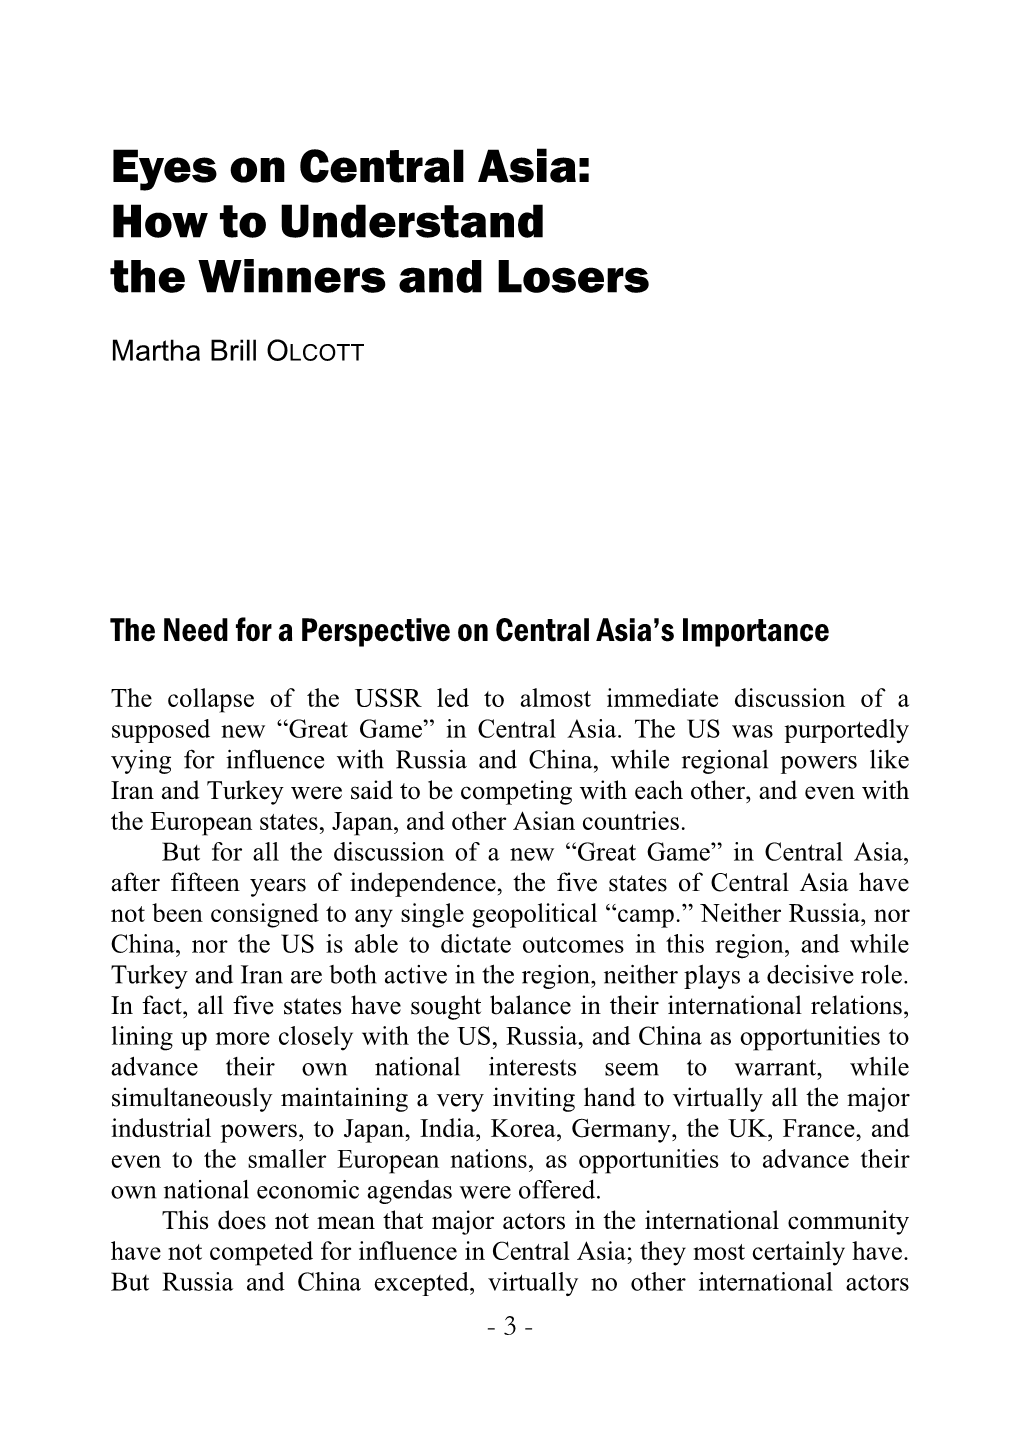 Eyes on Central Asia: How to Understand the Winners and Losers